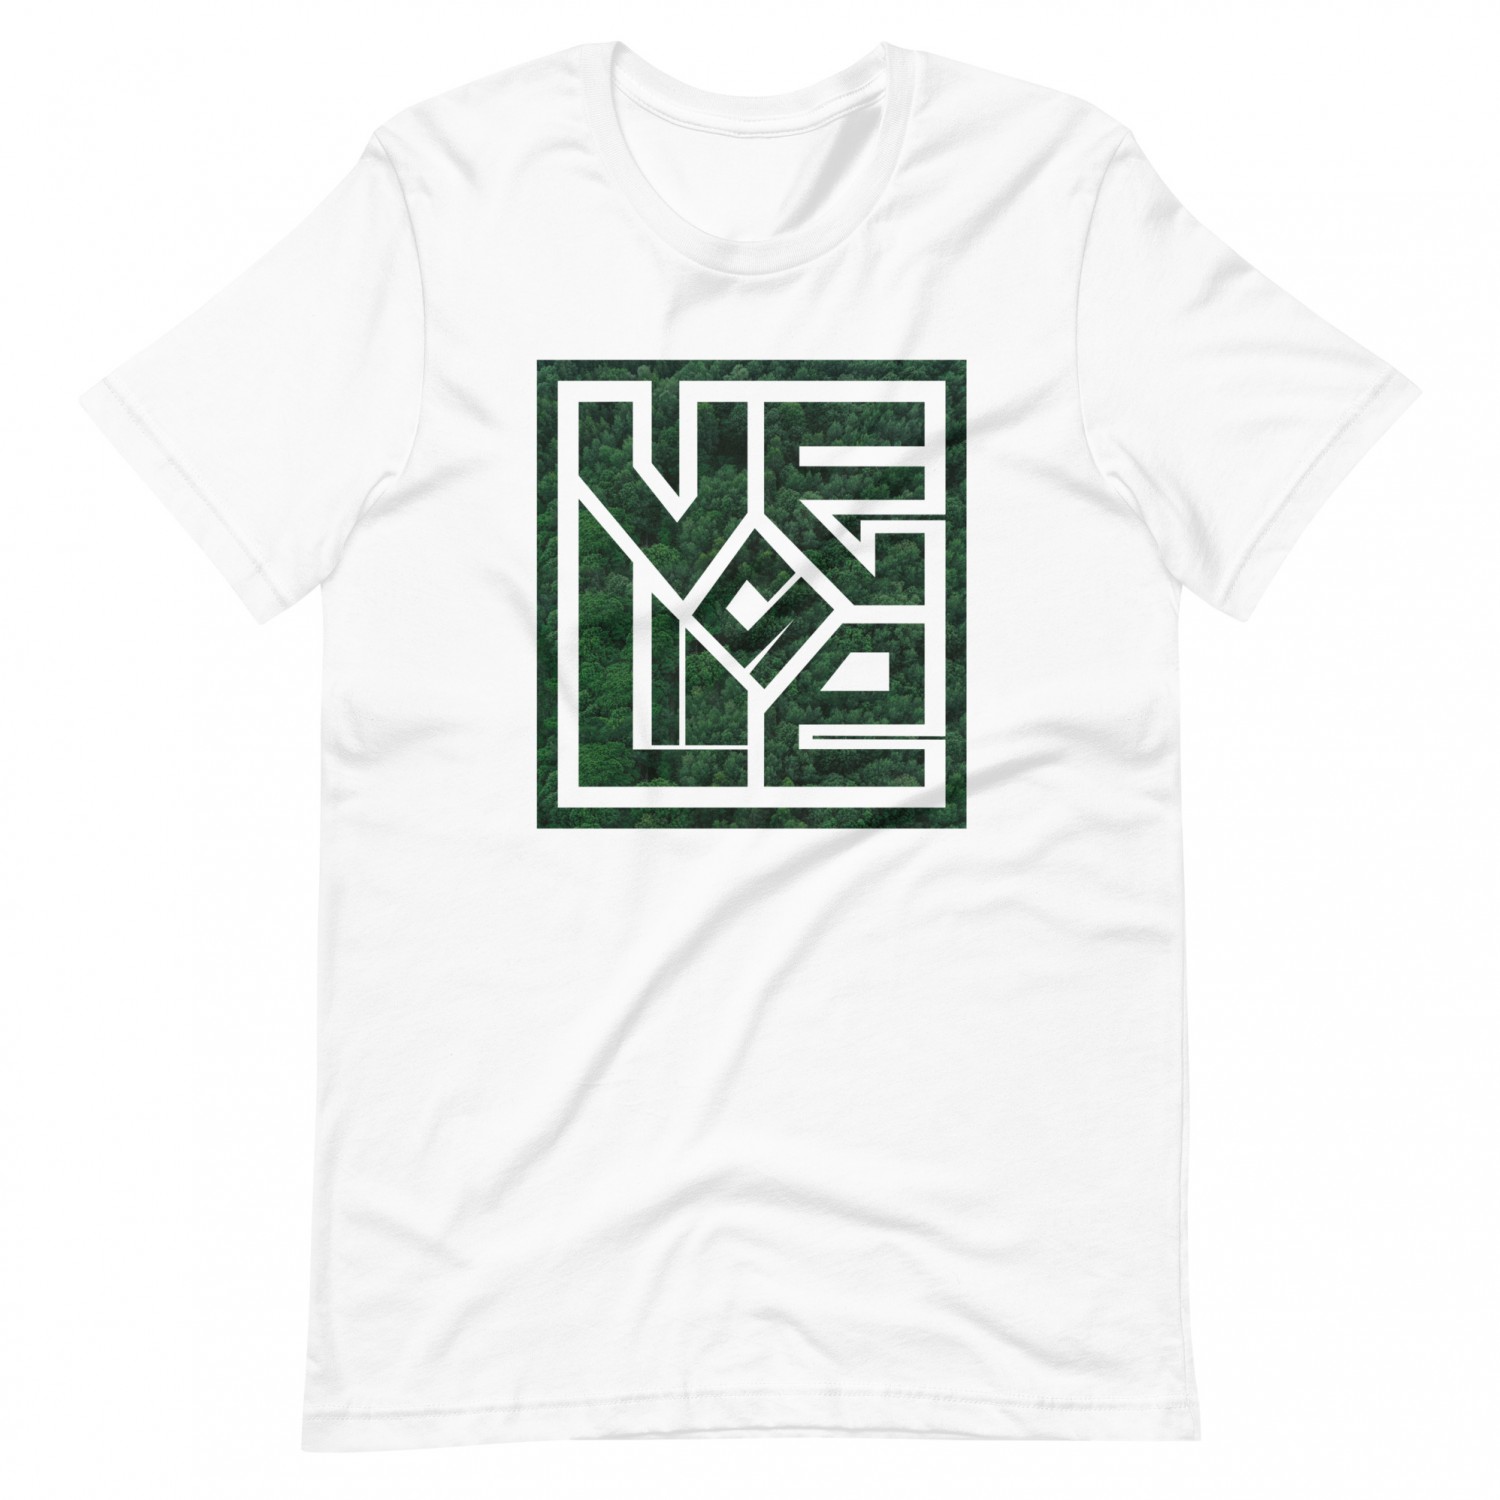 Buy a t-shirt with a print of Veles